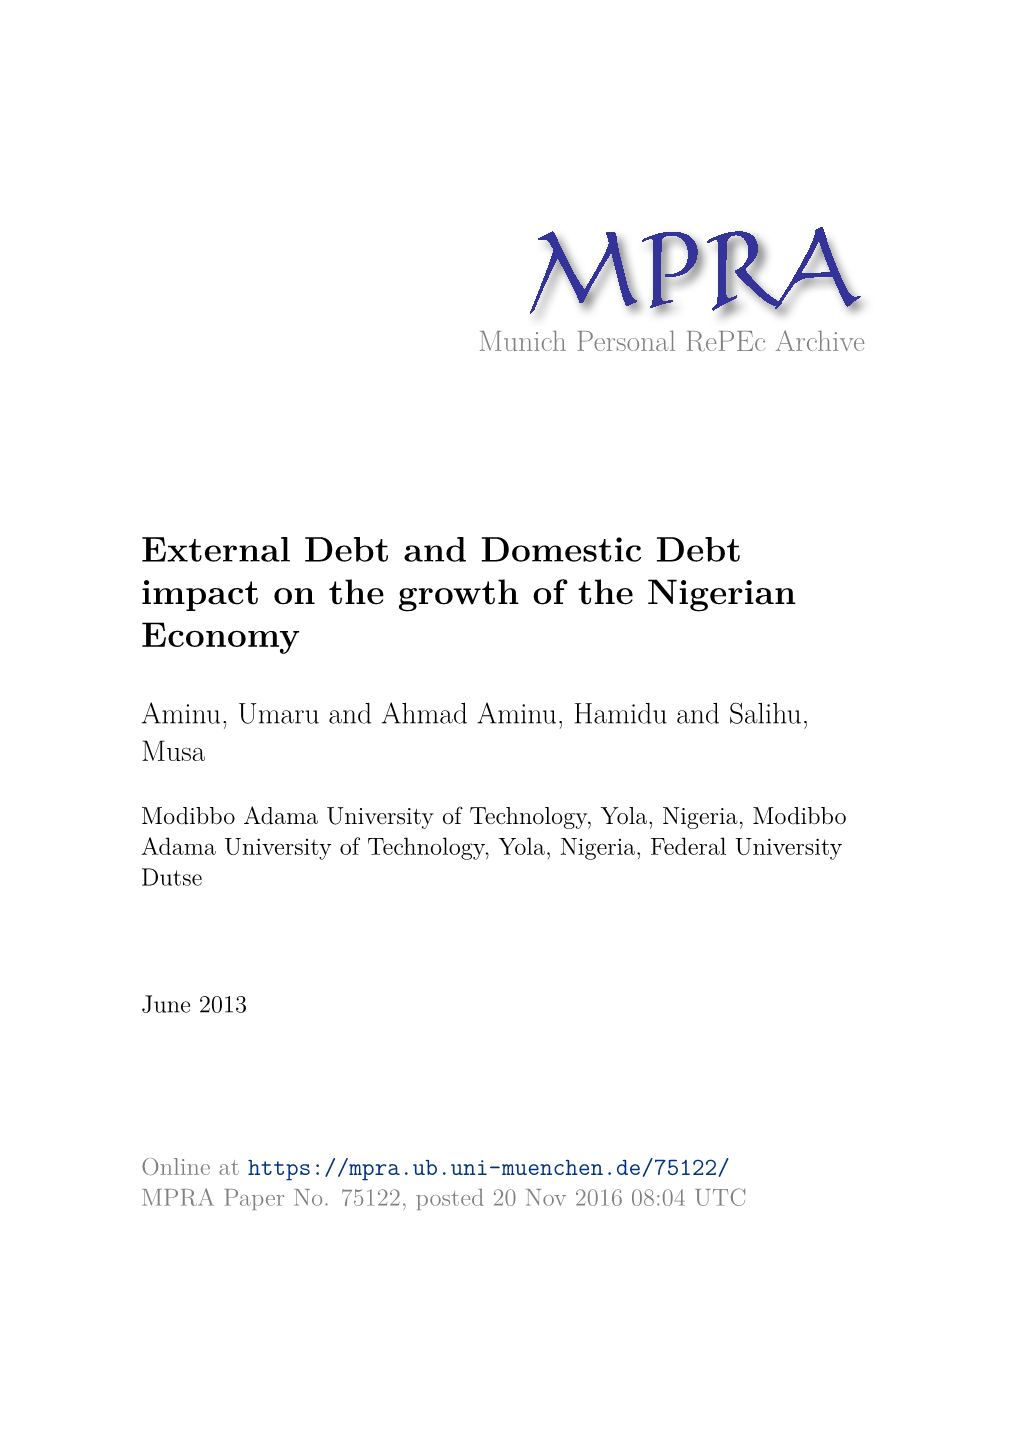 External Debt and Domestic Debt Impact on the Growth of the Nigerian Economy